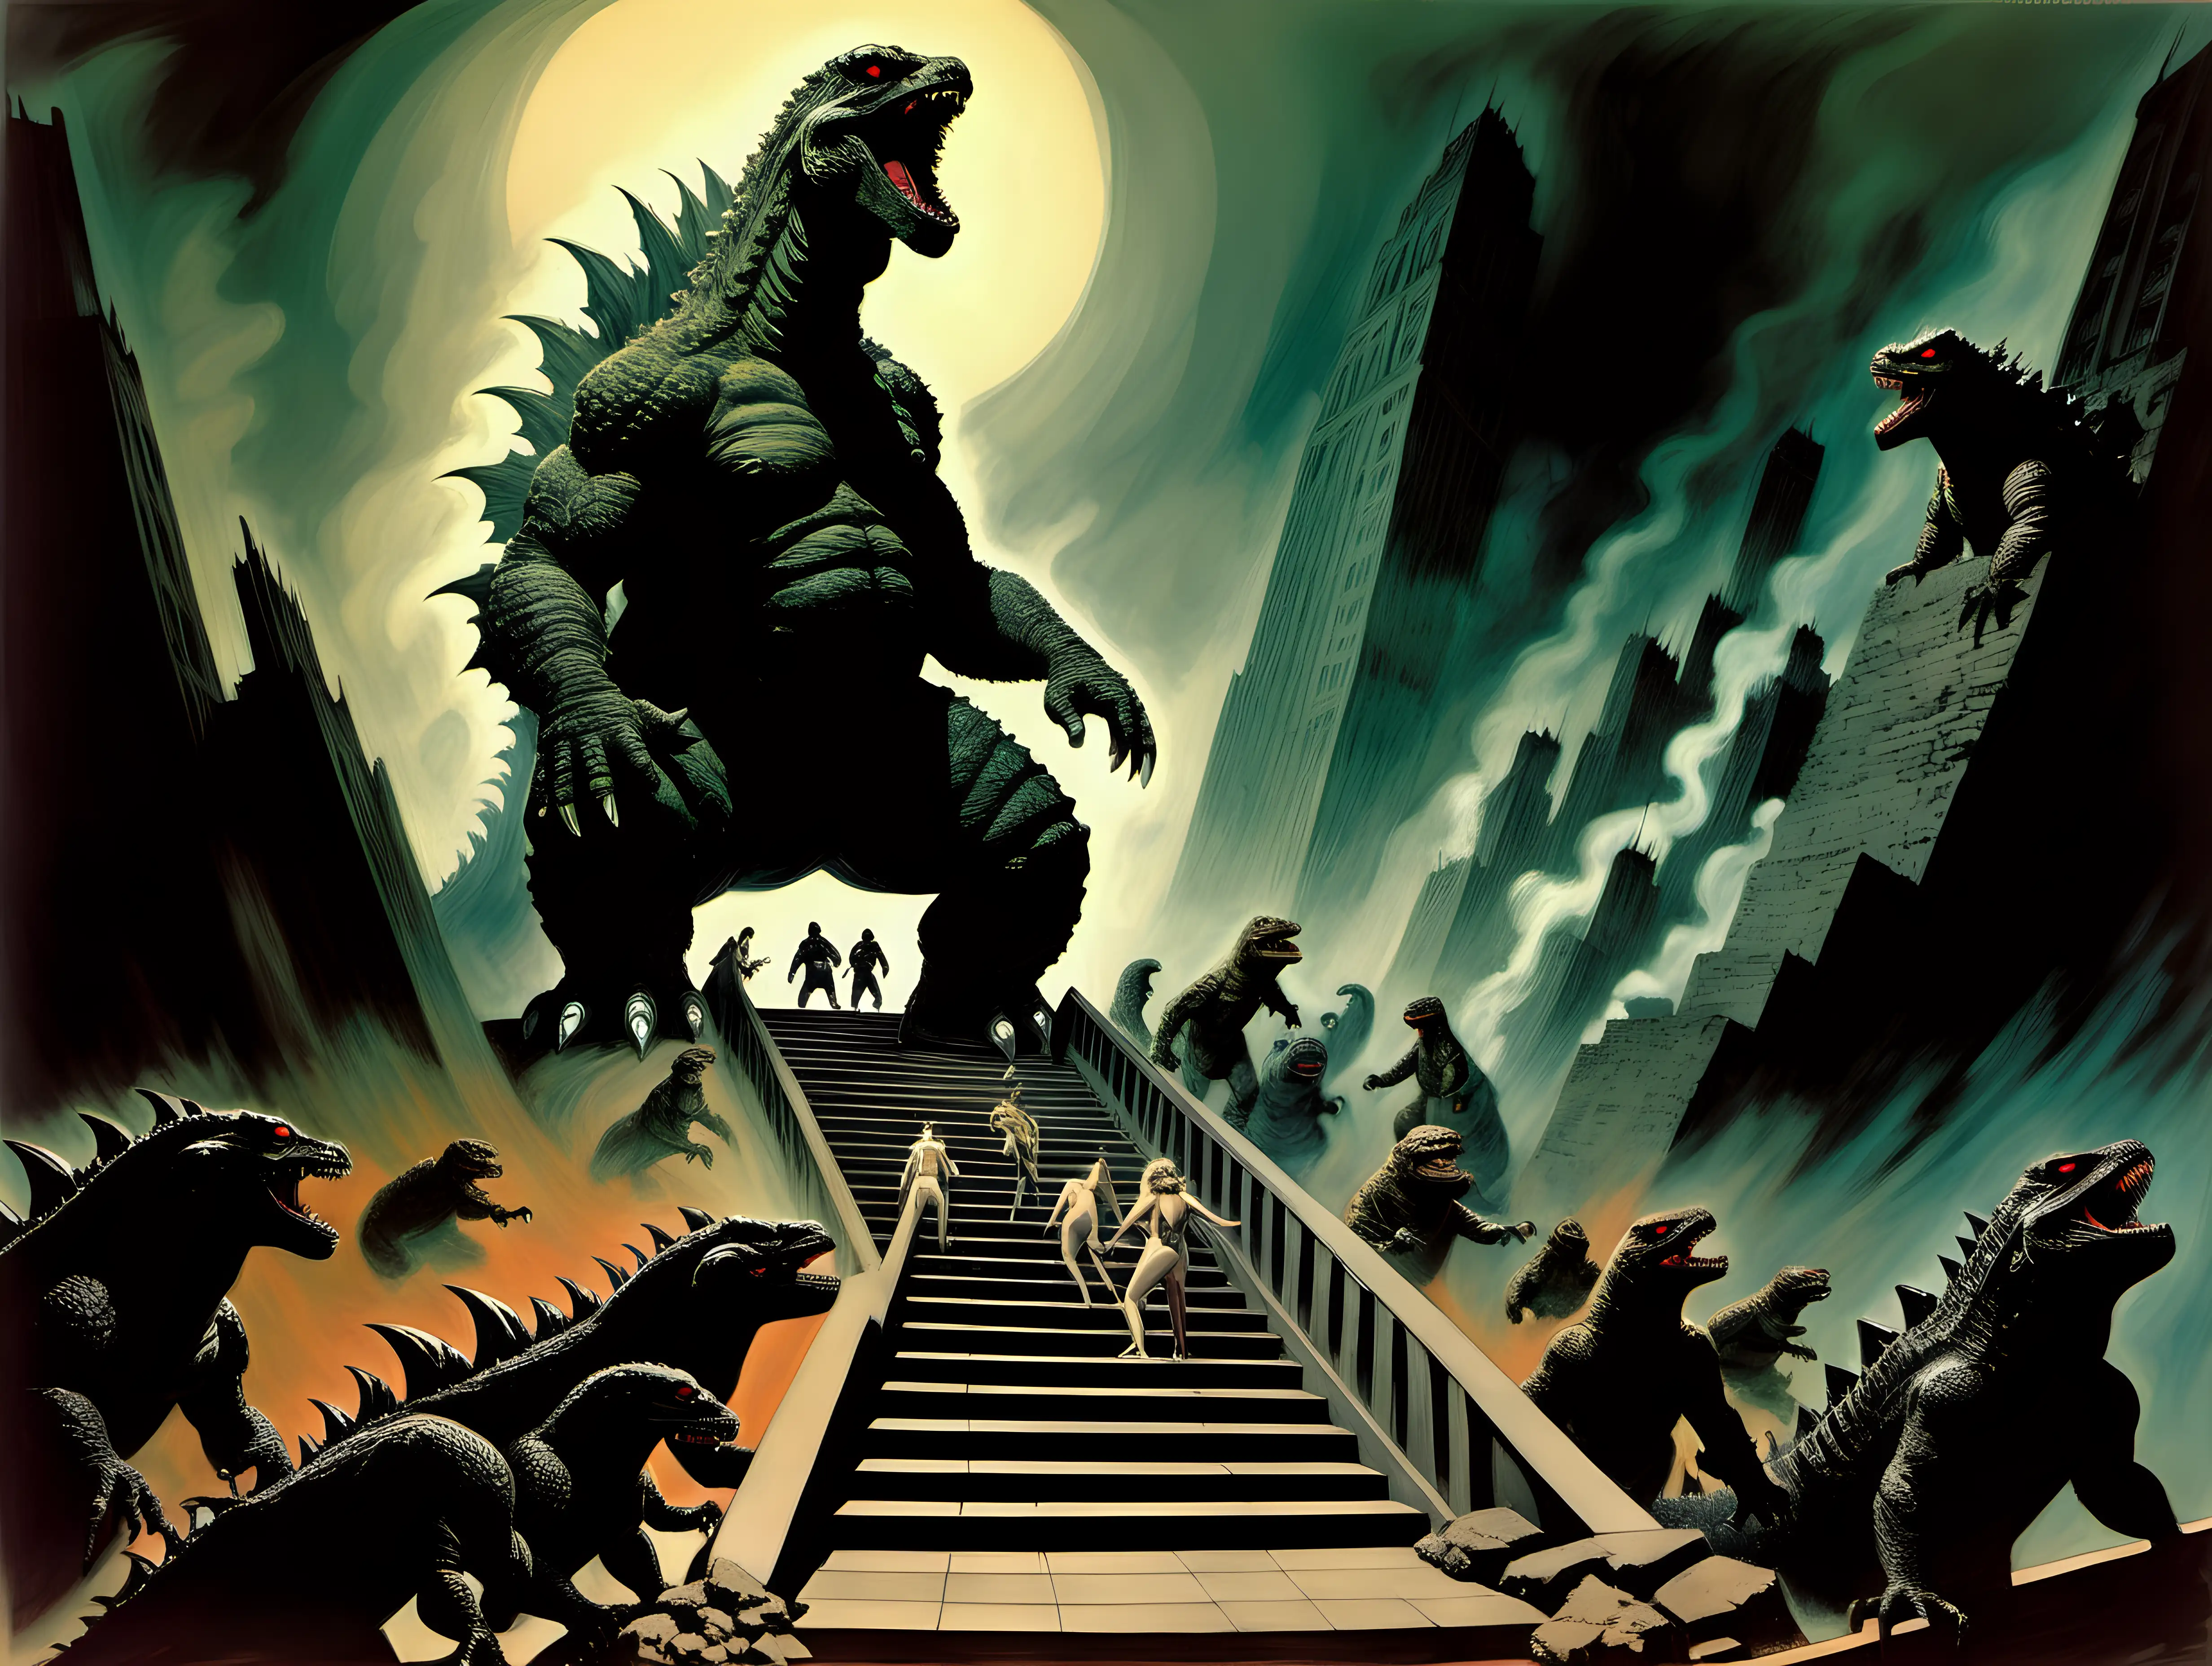 Downward stairs to Hell with Godzilla and other monsters in style of surrealism by frank frazetta